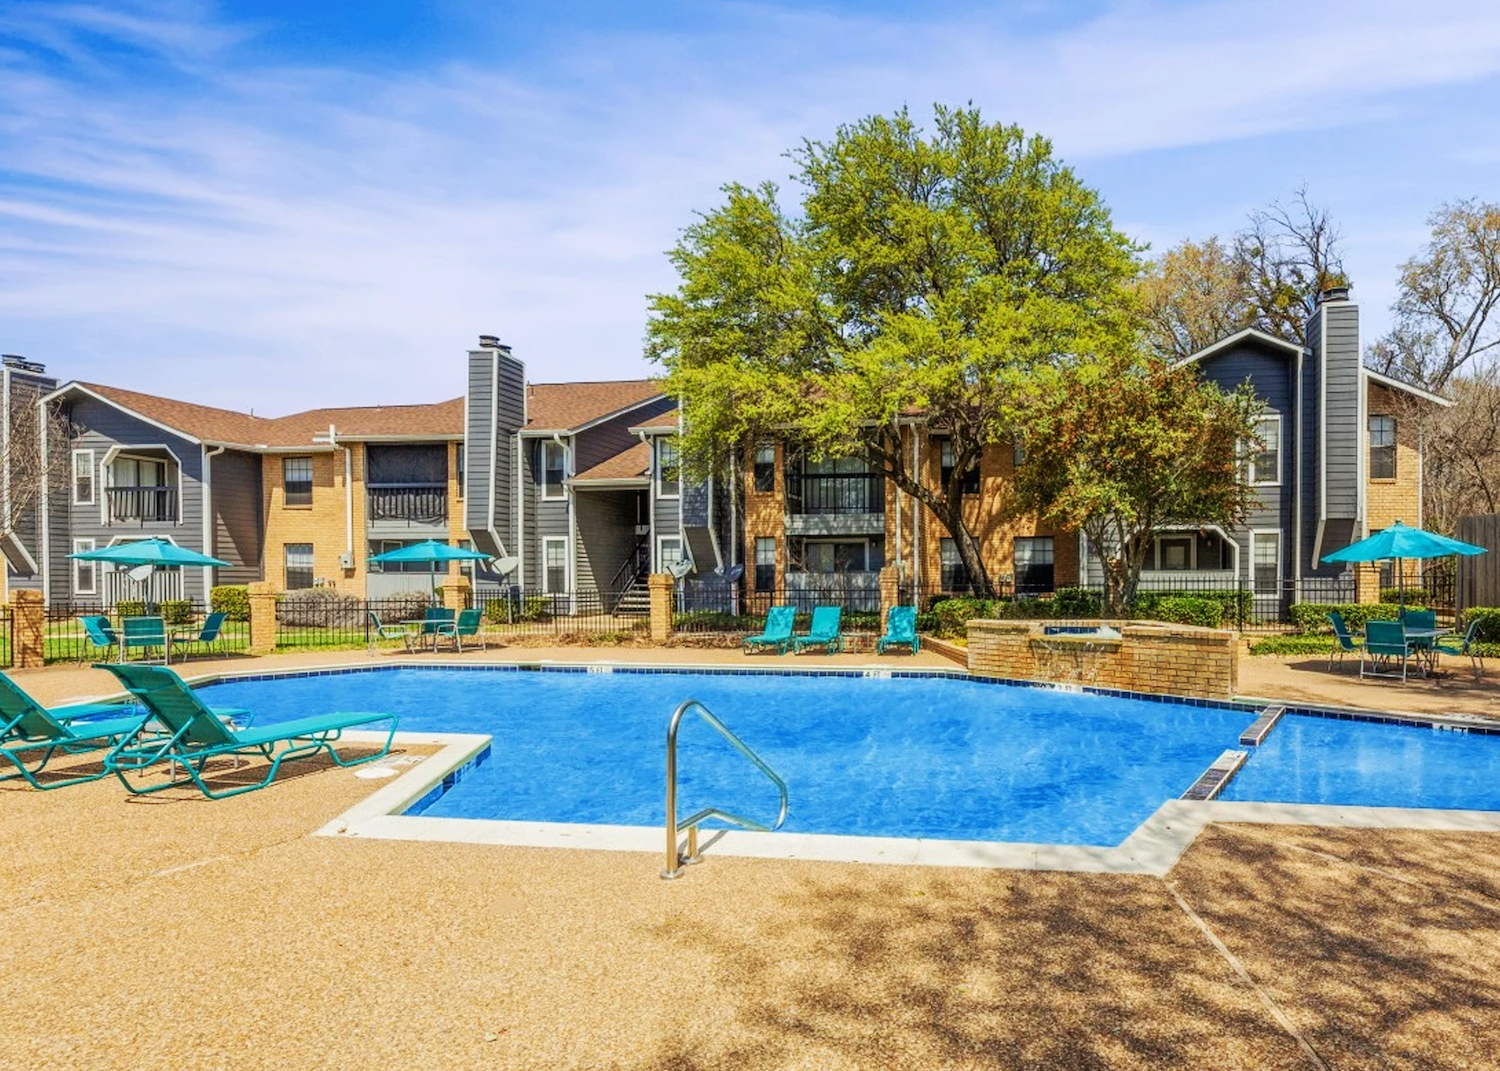 Cove Capital Buys Value-Add Multifamily Community Near Dallas for DST Offering